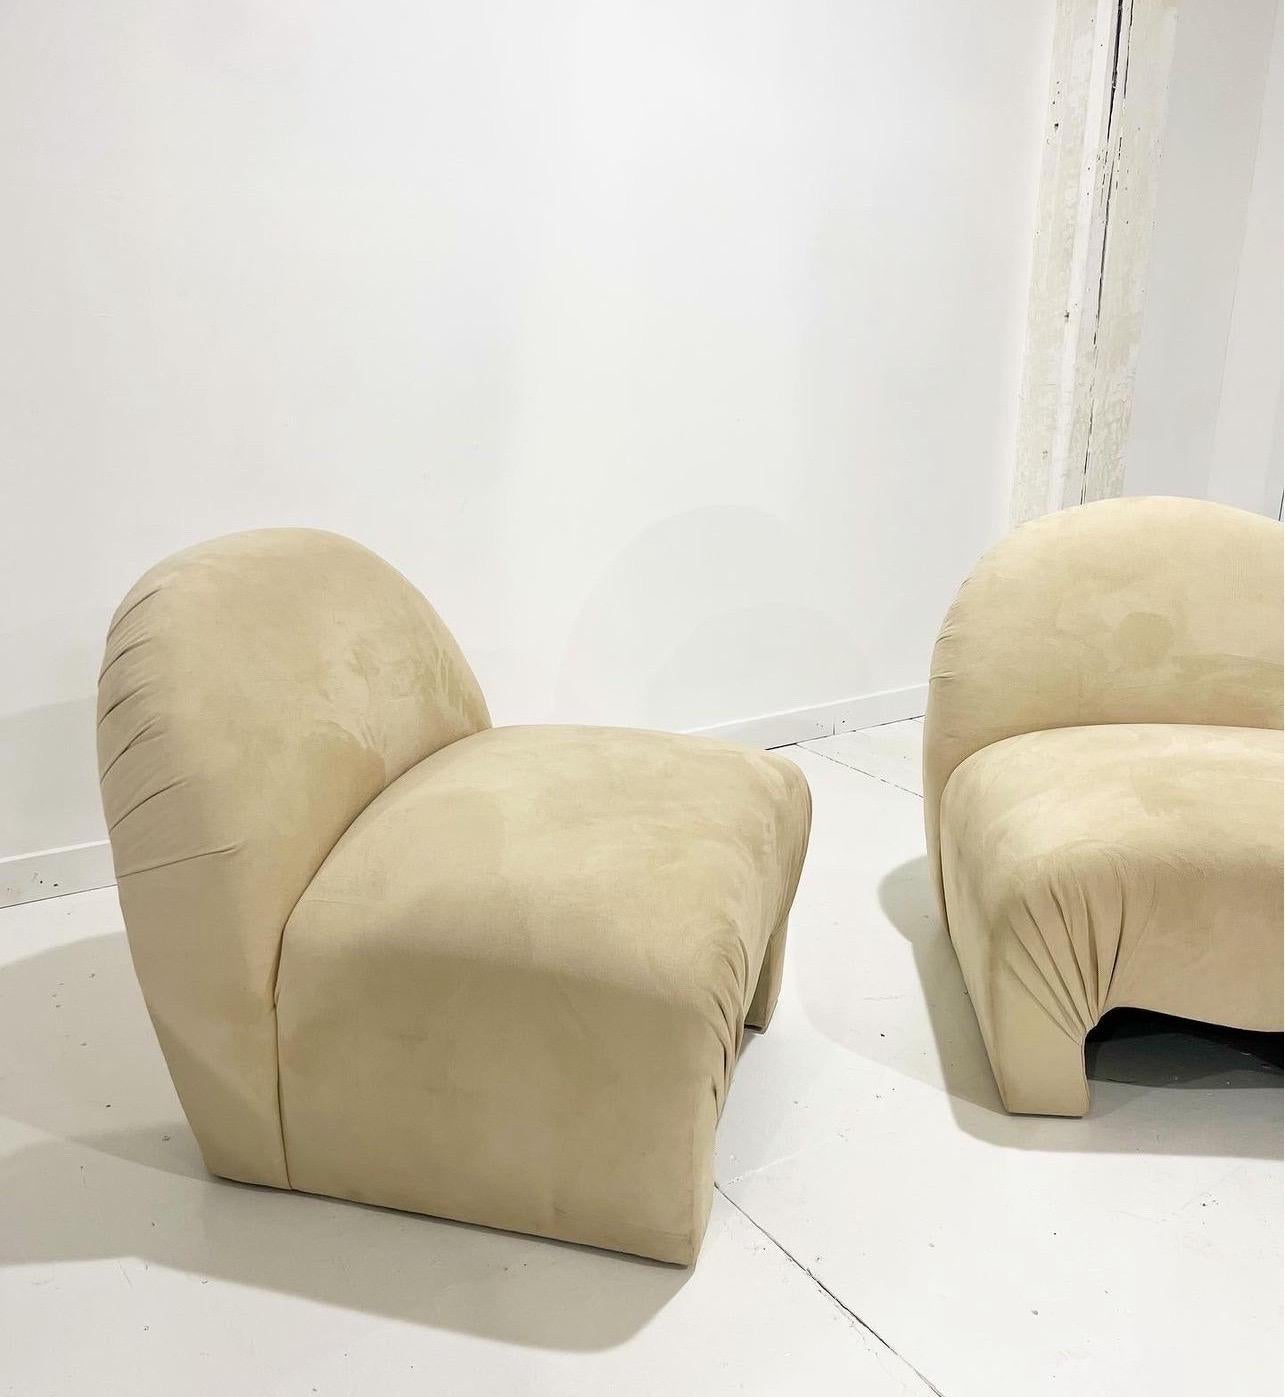 Absolutely stunning pair of sculptural lounge chairs for Weiman

The perfect low-level living sitting chairs. Love the curvaceous, whimsical and organic shapes of these chairs! These chairs are extremely comfortable and cozy. Upholstered in a bright